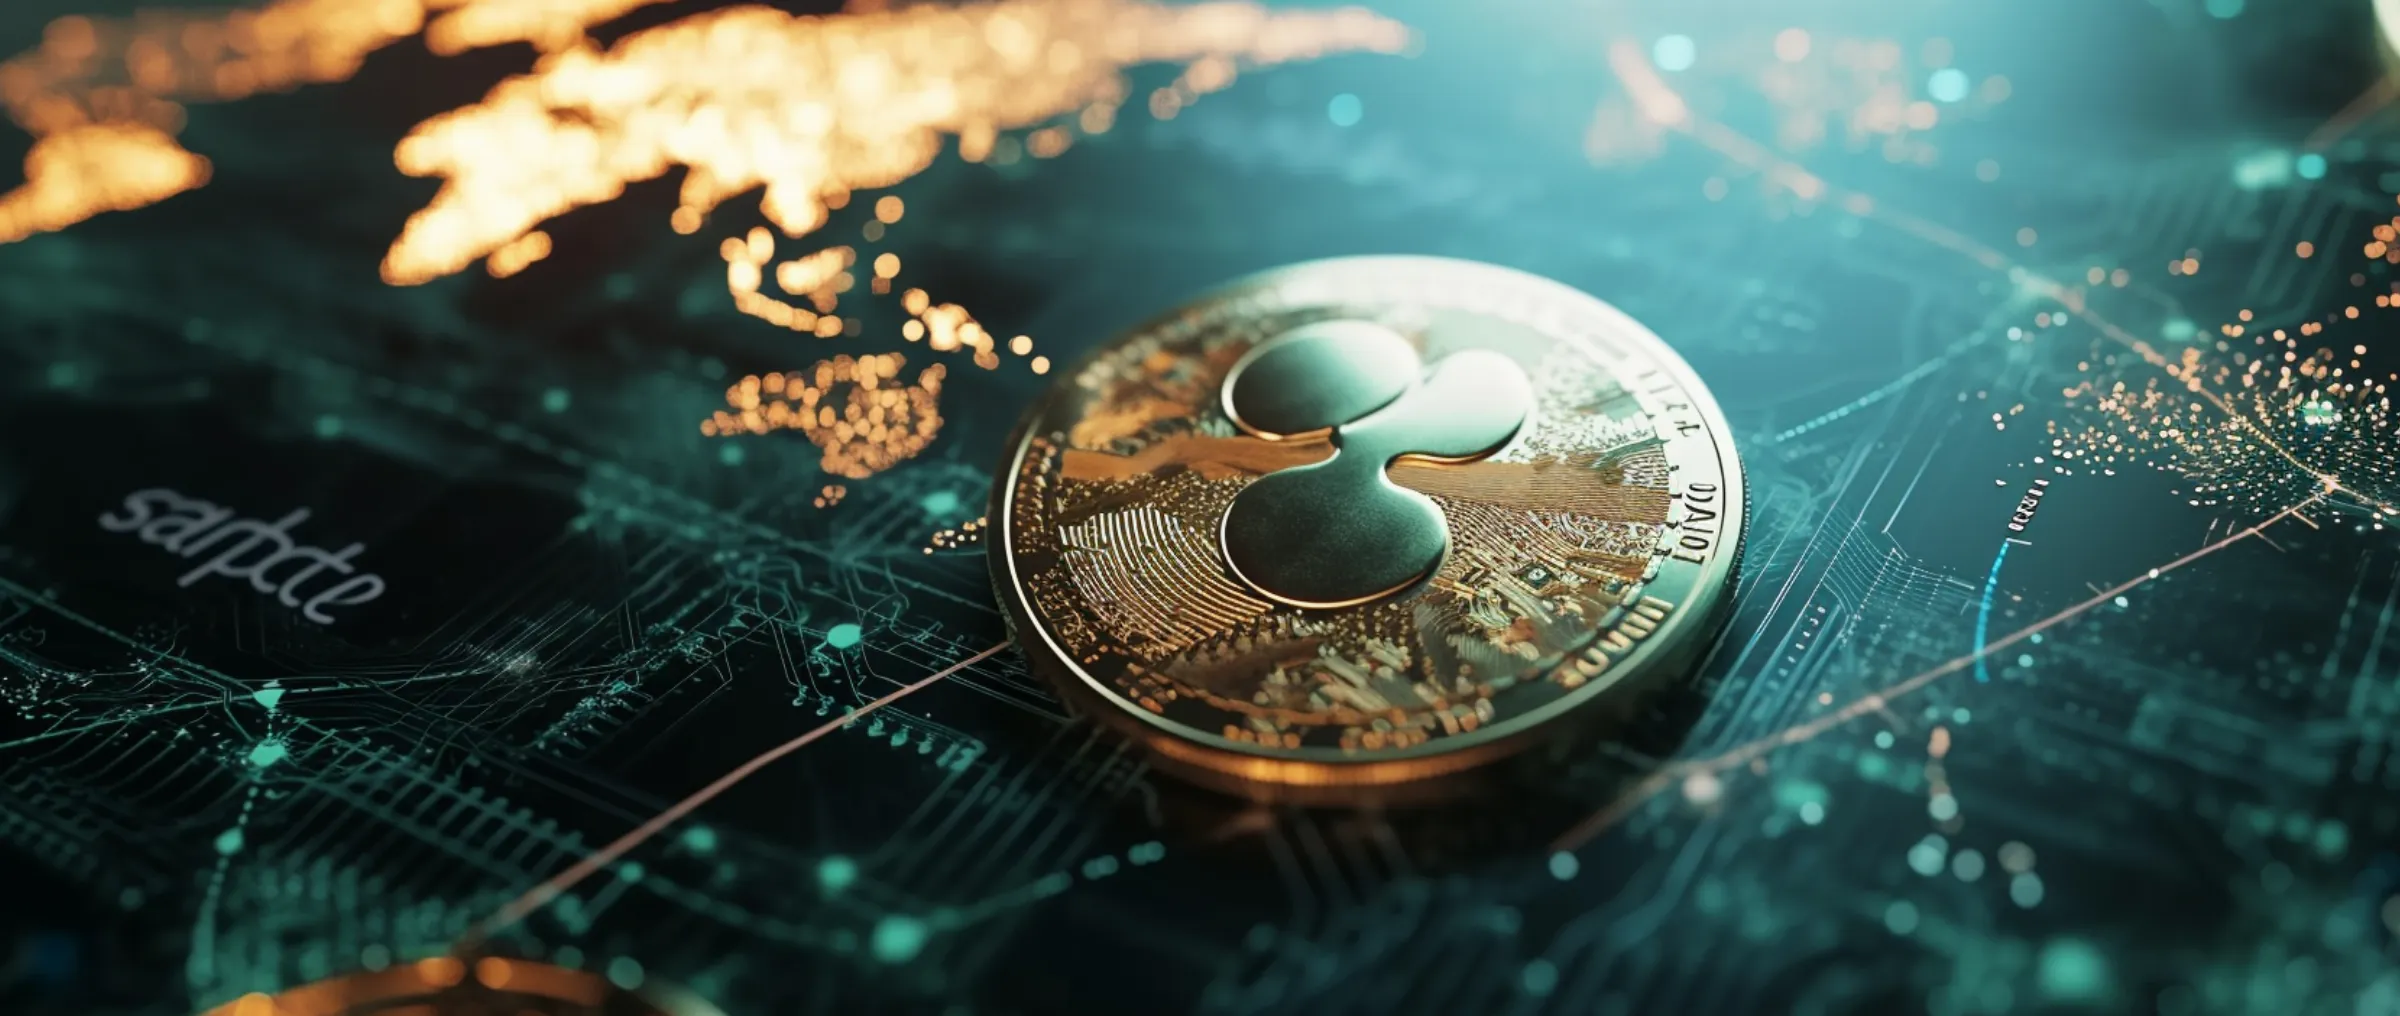 SBI Holdings, a partner of Ripple, announces the launch of NFTs on the XRP Ledger (XRPL) platform